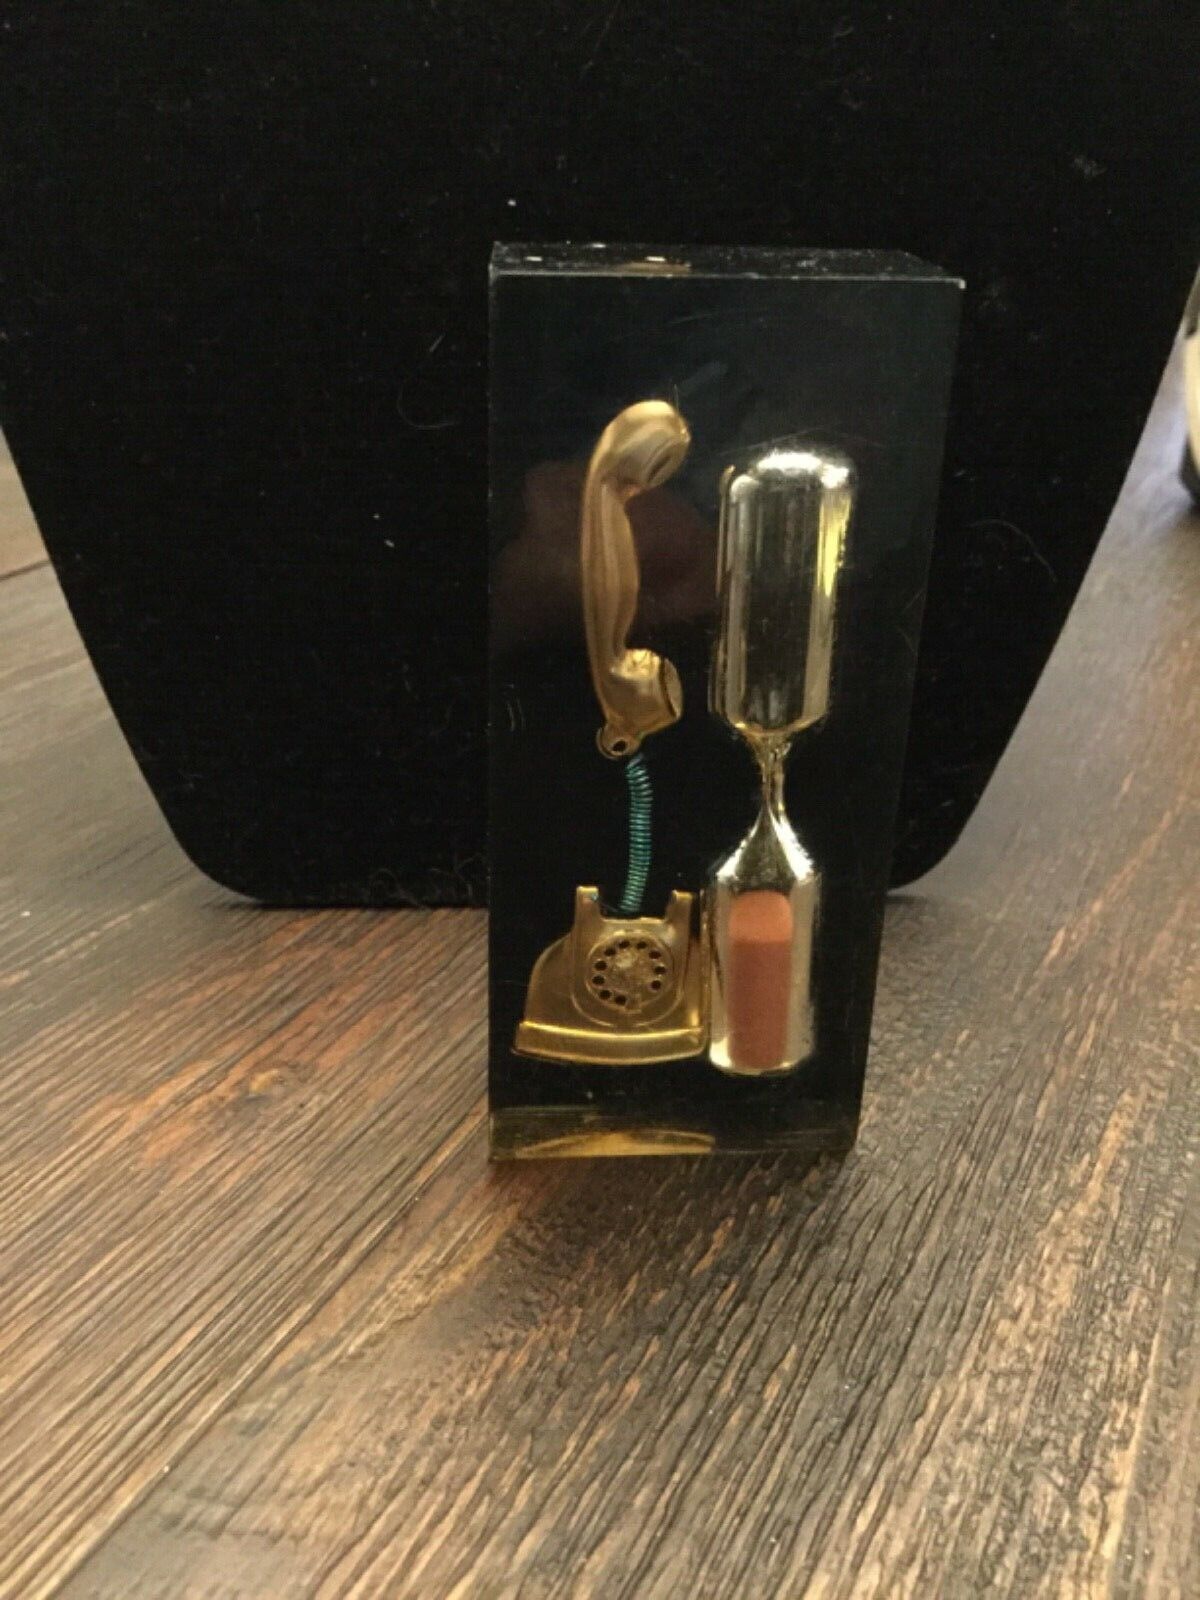 Vintage Estate Acrylic Sand Hourglass Timer with Goldtone Telephone